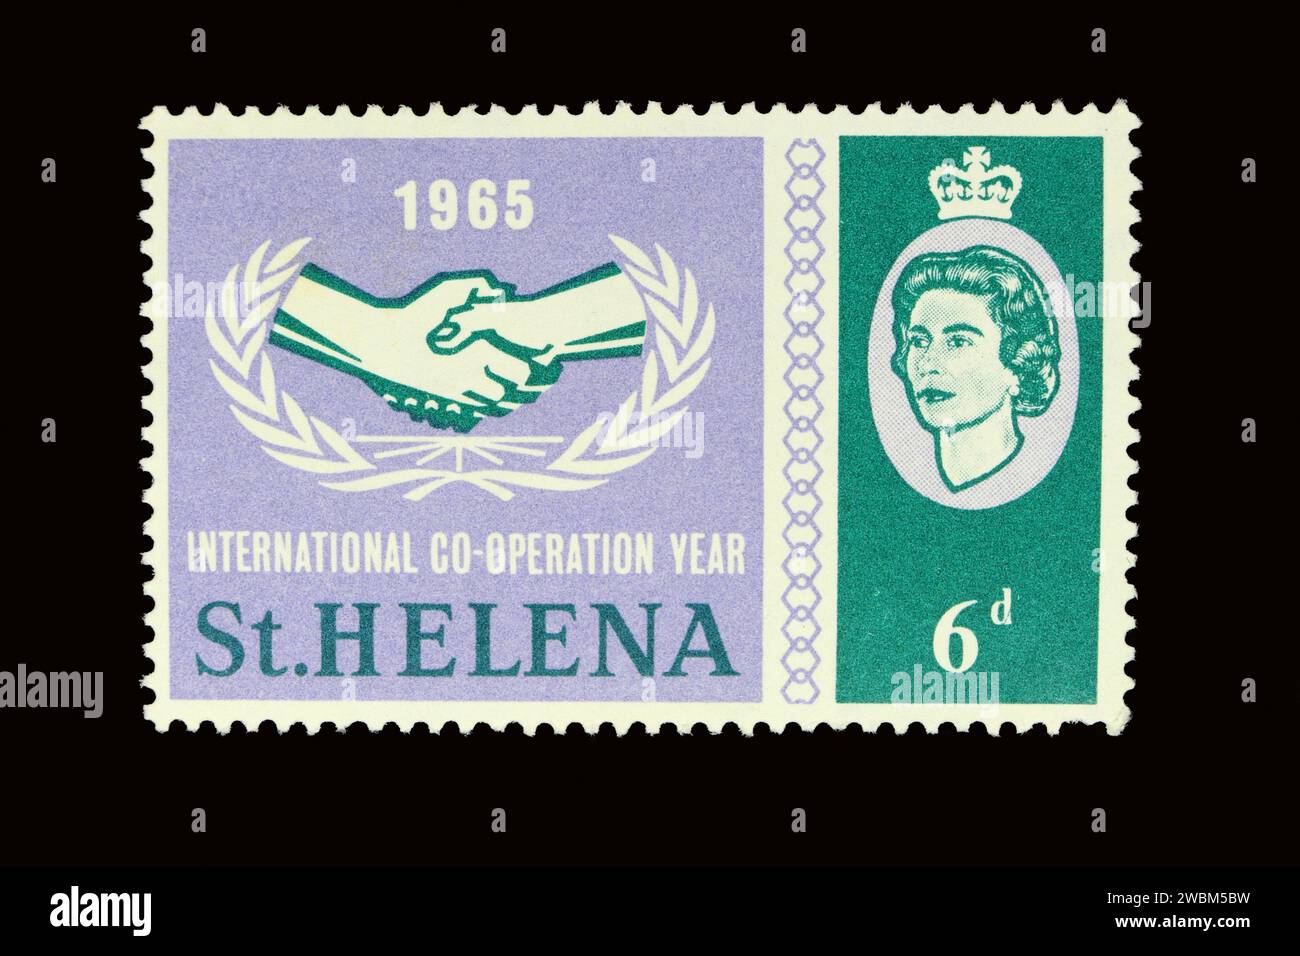 Postage stamp of St Helena effigy of Queen Elizabeth II stamp issue celebrating 1965 year of international co operation stamp collecting hobby Stock Photo